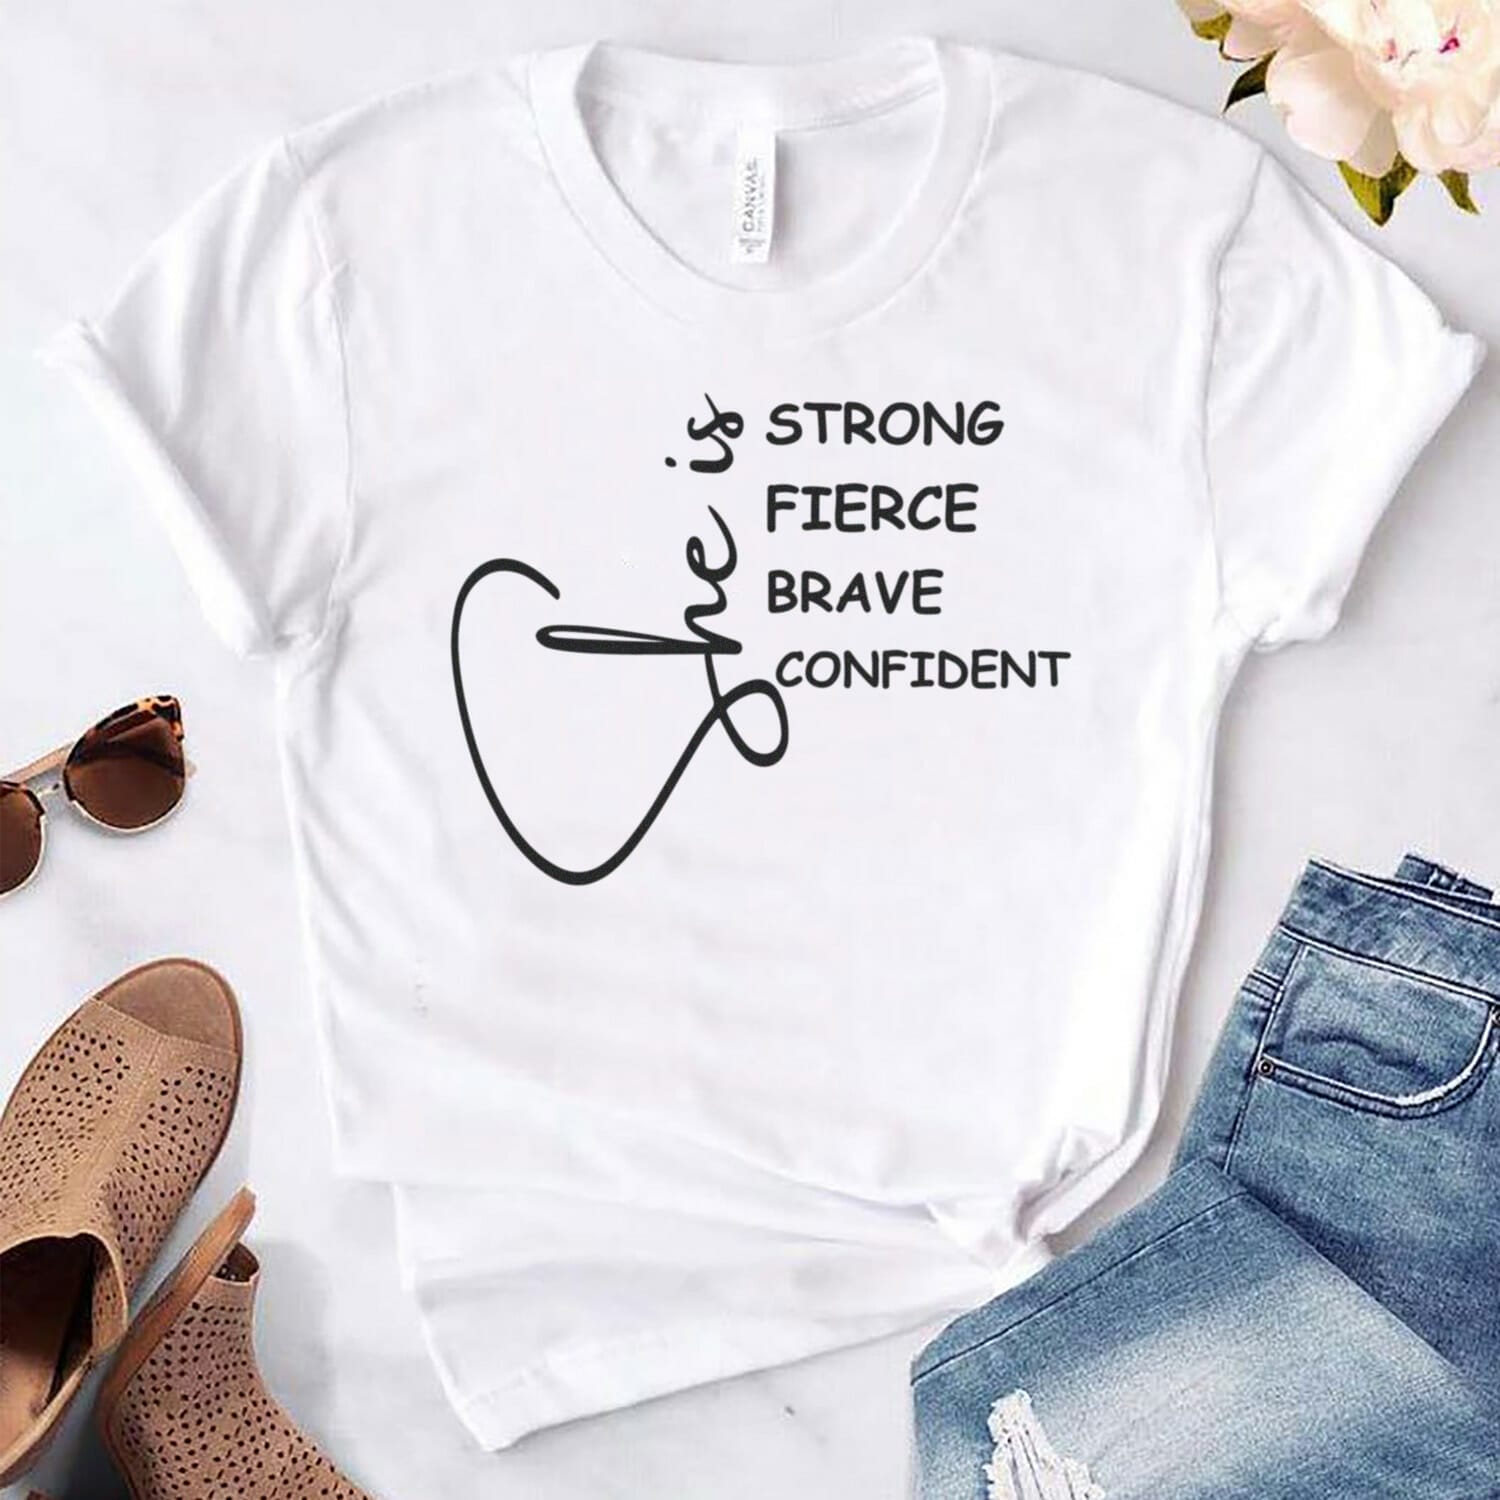 She is strong, fierce, brave, confident positive quote T-shirt Design